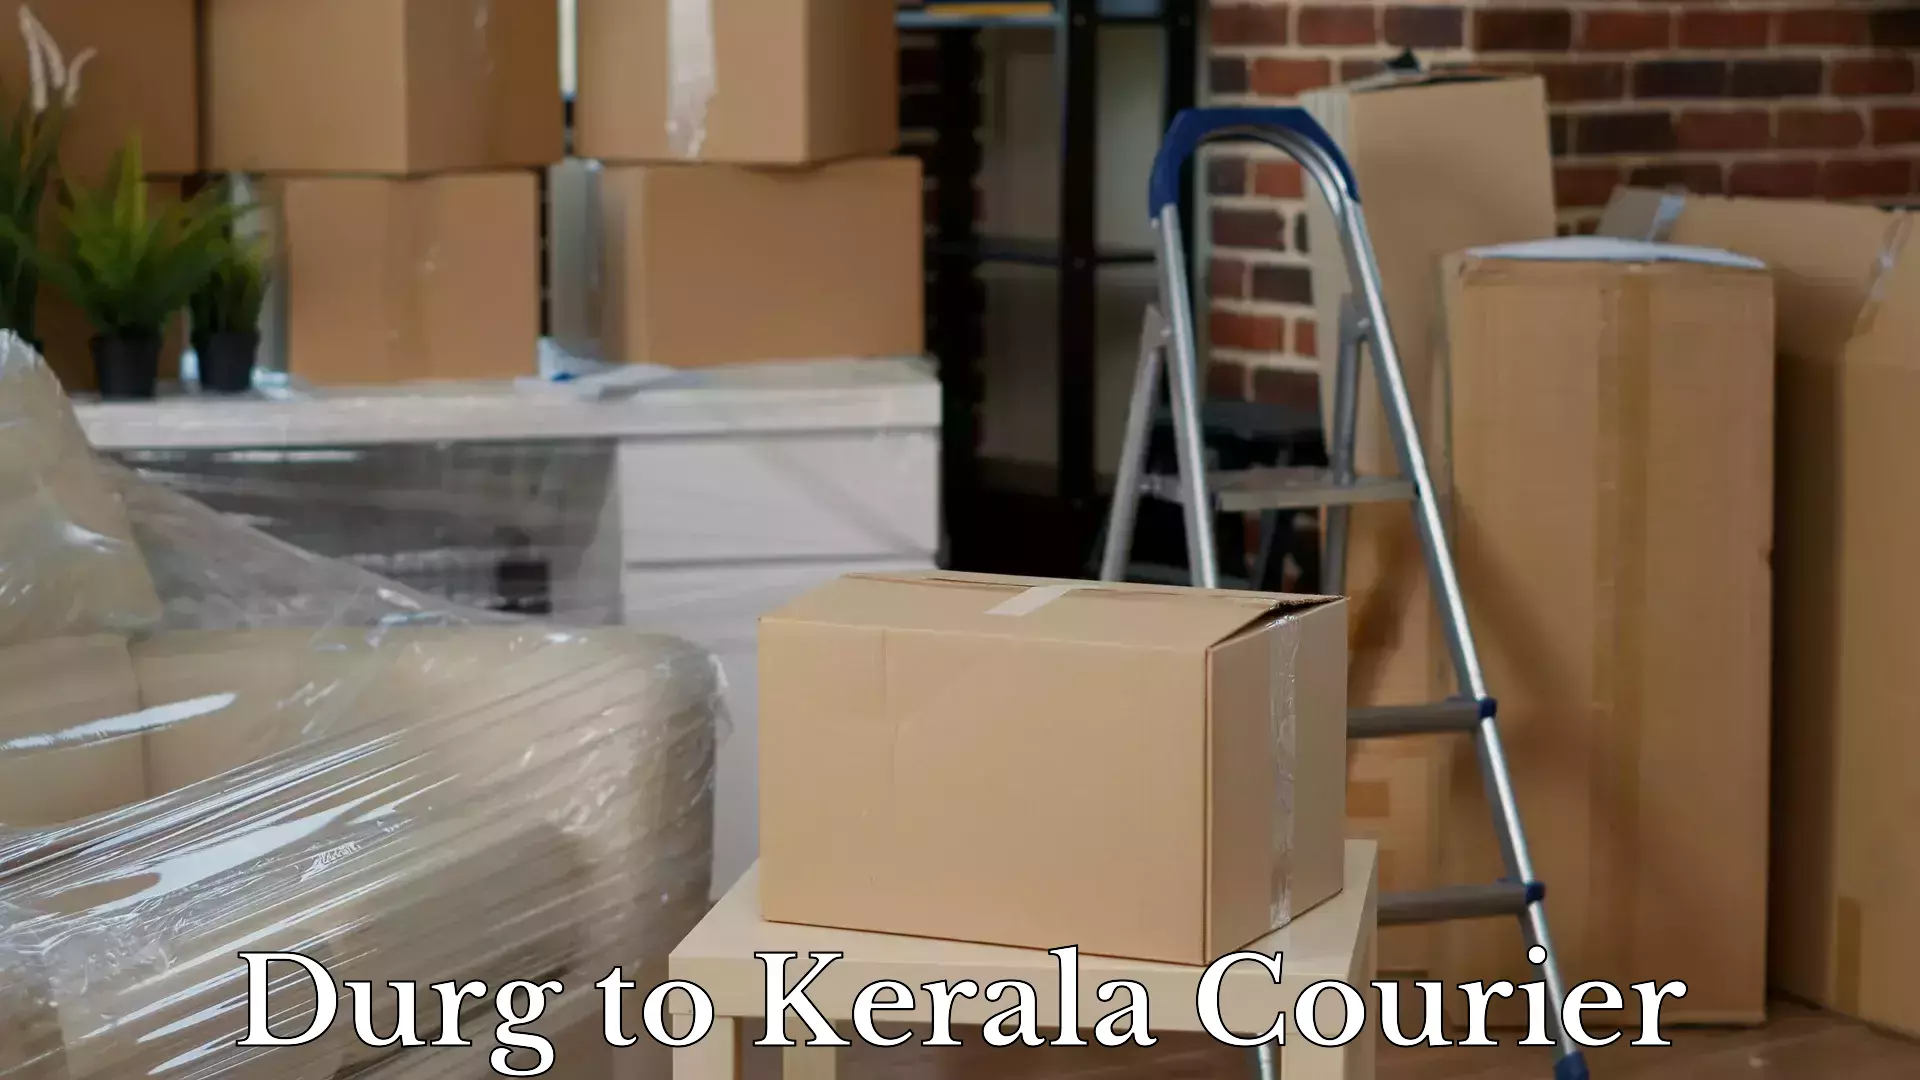 Hassle-free luggage shipping Durg to Kottayam